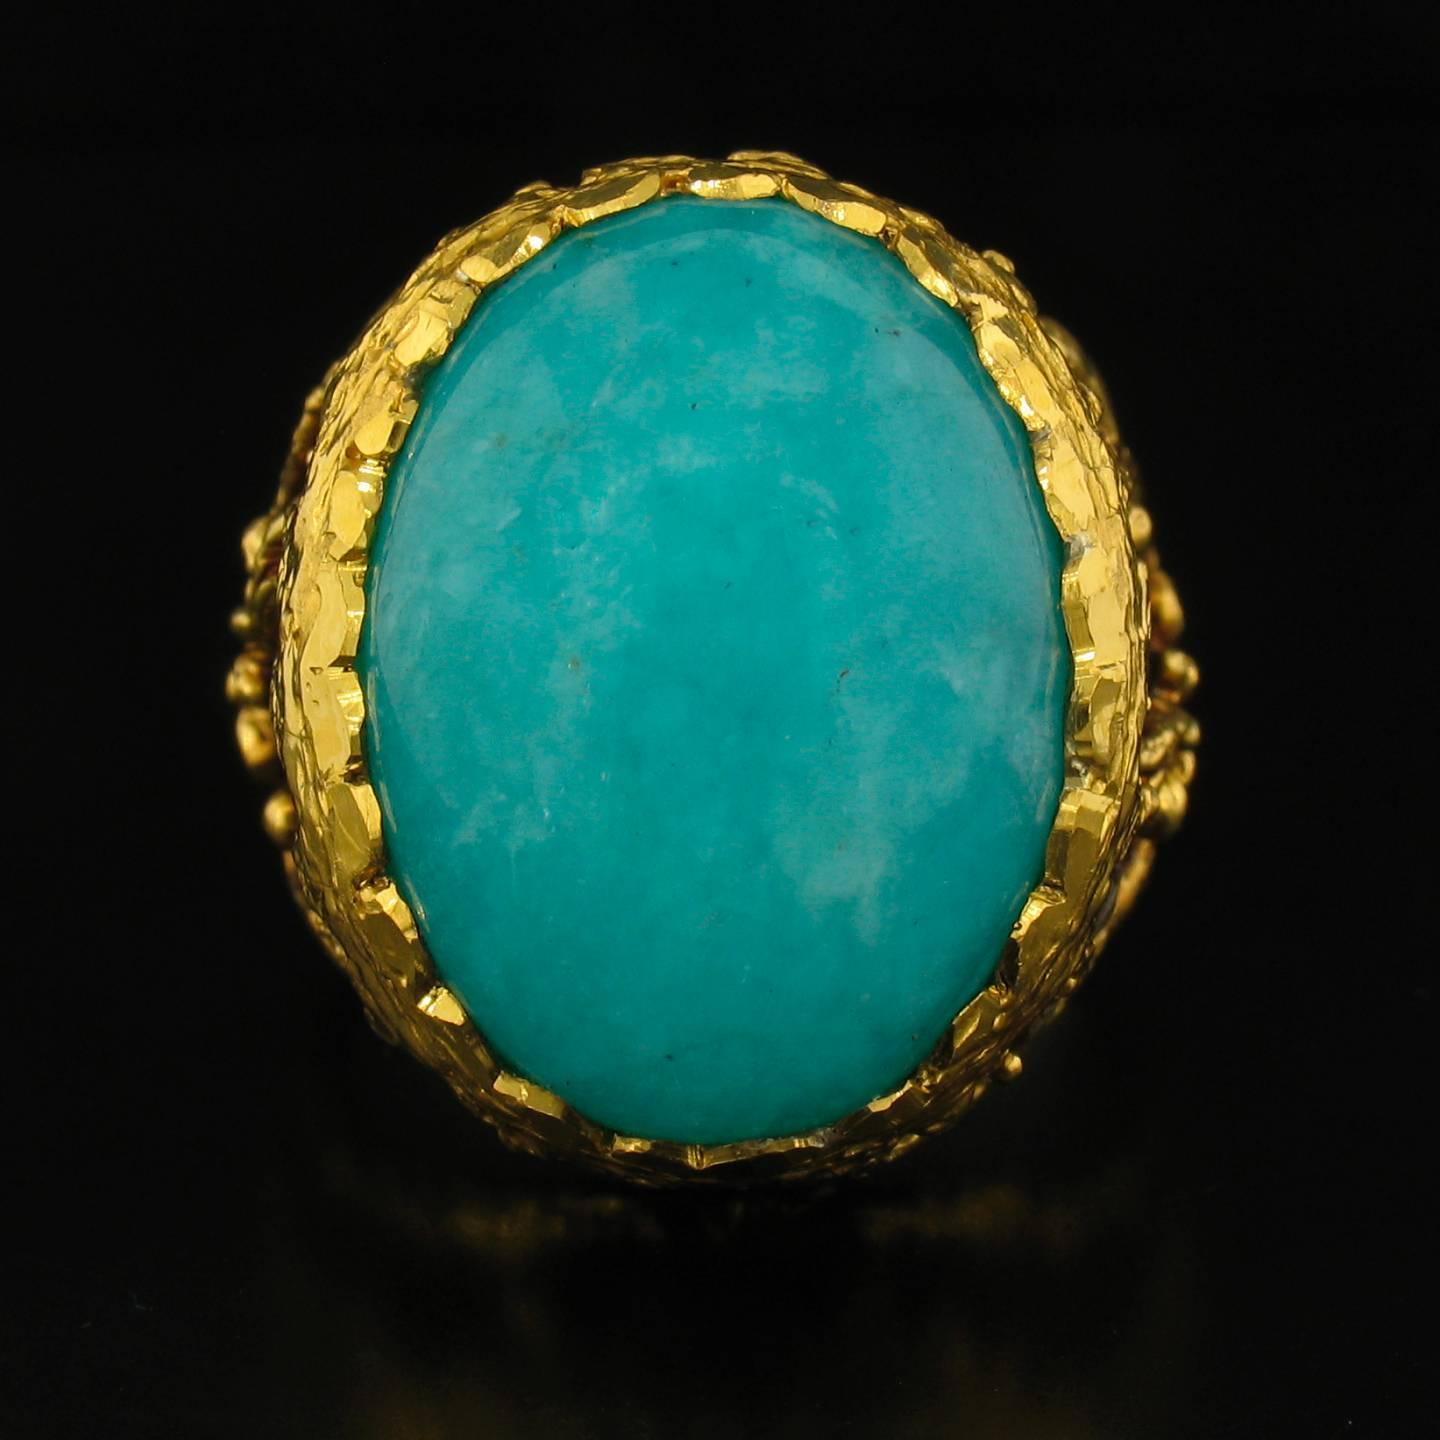 This ring was designed and made by well known designer Victor Velyan.  It contains beautiful turquoise-blue colored cabochon of Amazonite weighing 16.38 carats, and Diamond accents weighing 0.11 carats.  It is made of a base of pure Silver with all